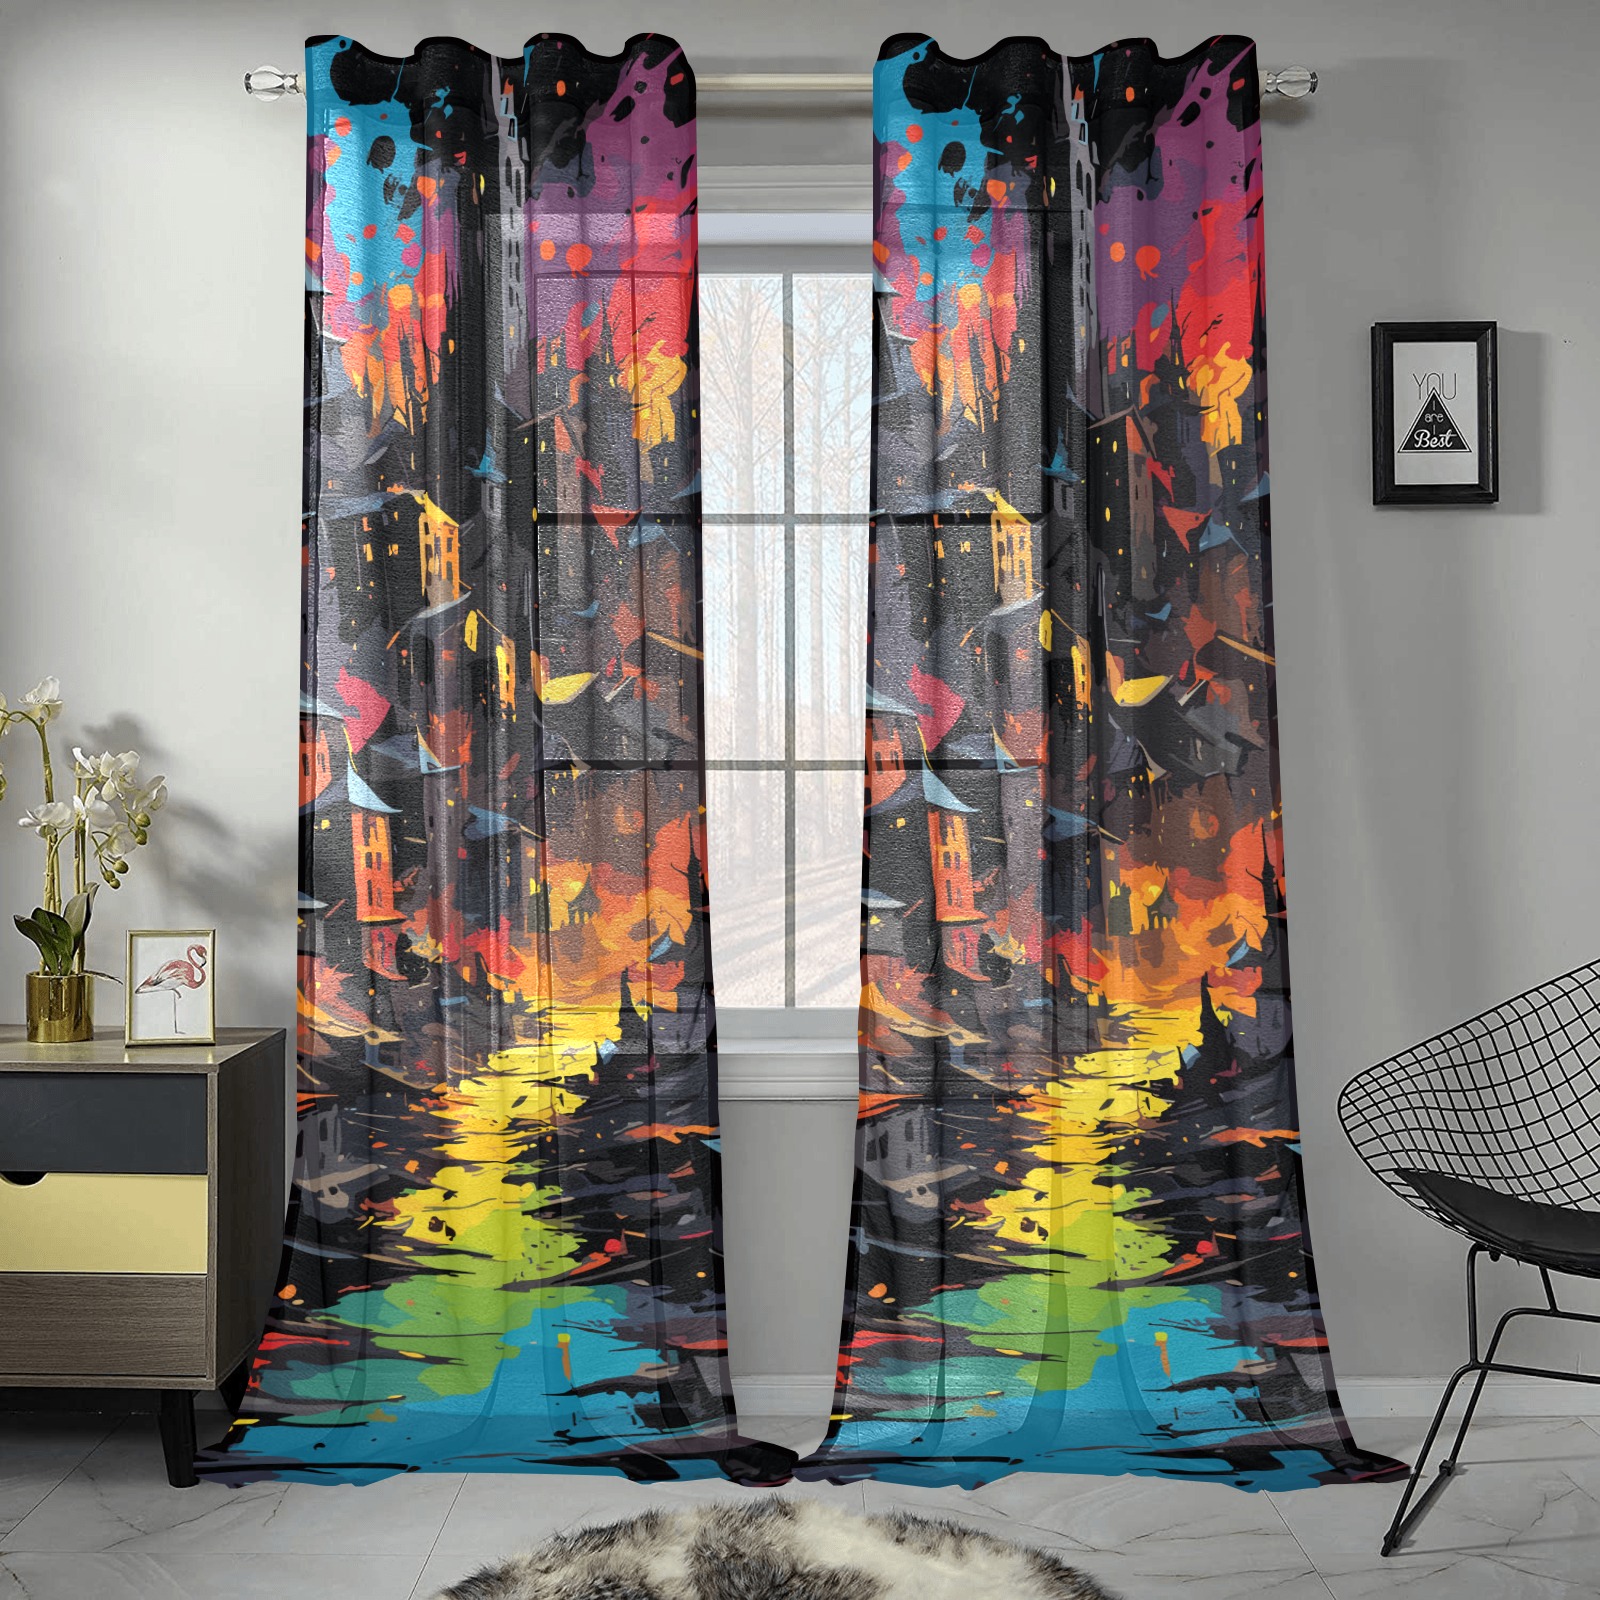 Dark fantasy city. Buildings and colors on black Gauze Curtain 28"x95" (Two-Piece)